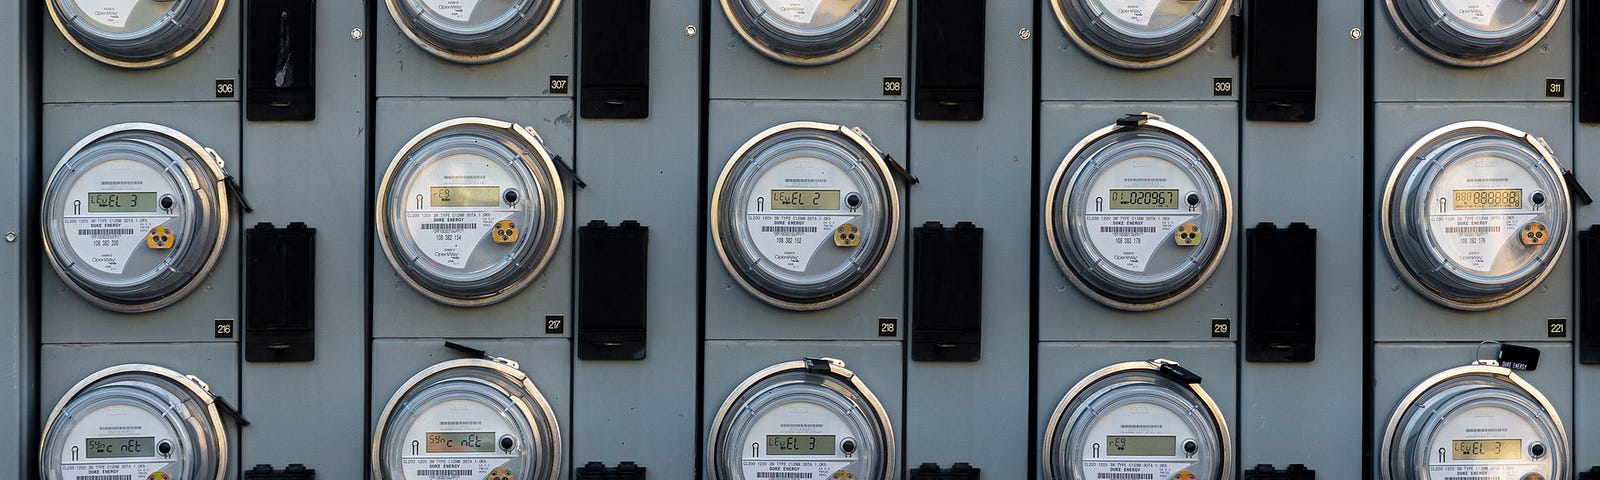 A bank of utility meters in Indiana. Photo by Jon Moore